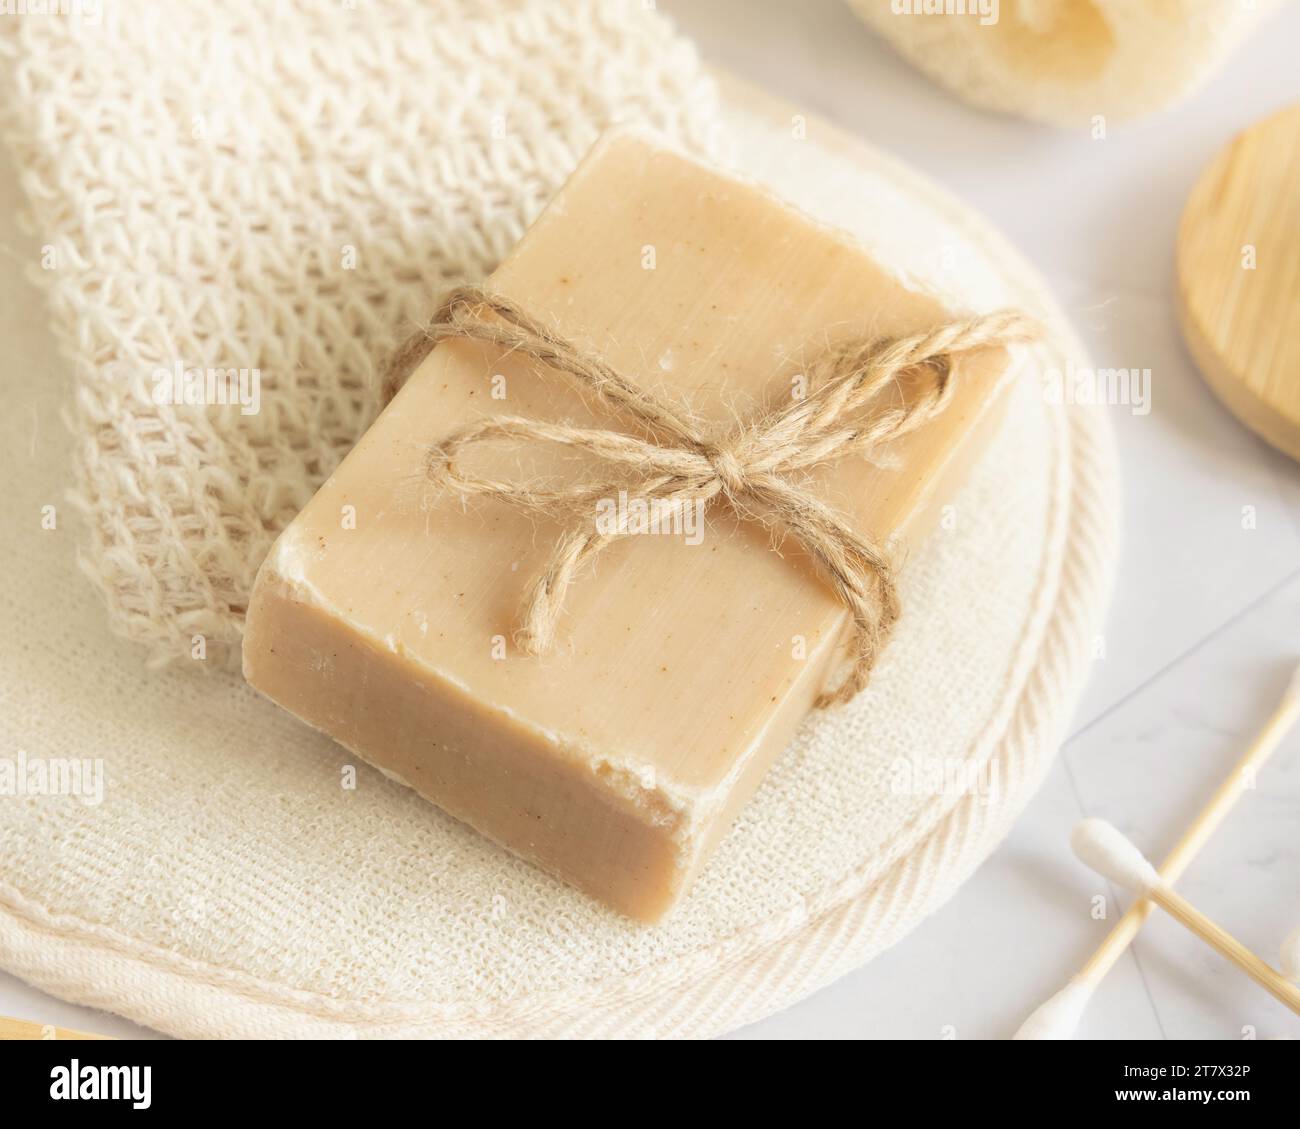 Beige handmade soap bar on sisal soap saver bag on white marble table close up, copy space. Natural herbal products for face and body care Stock Photo